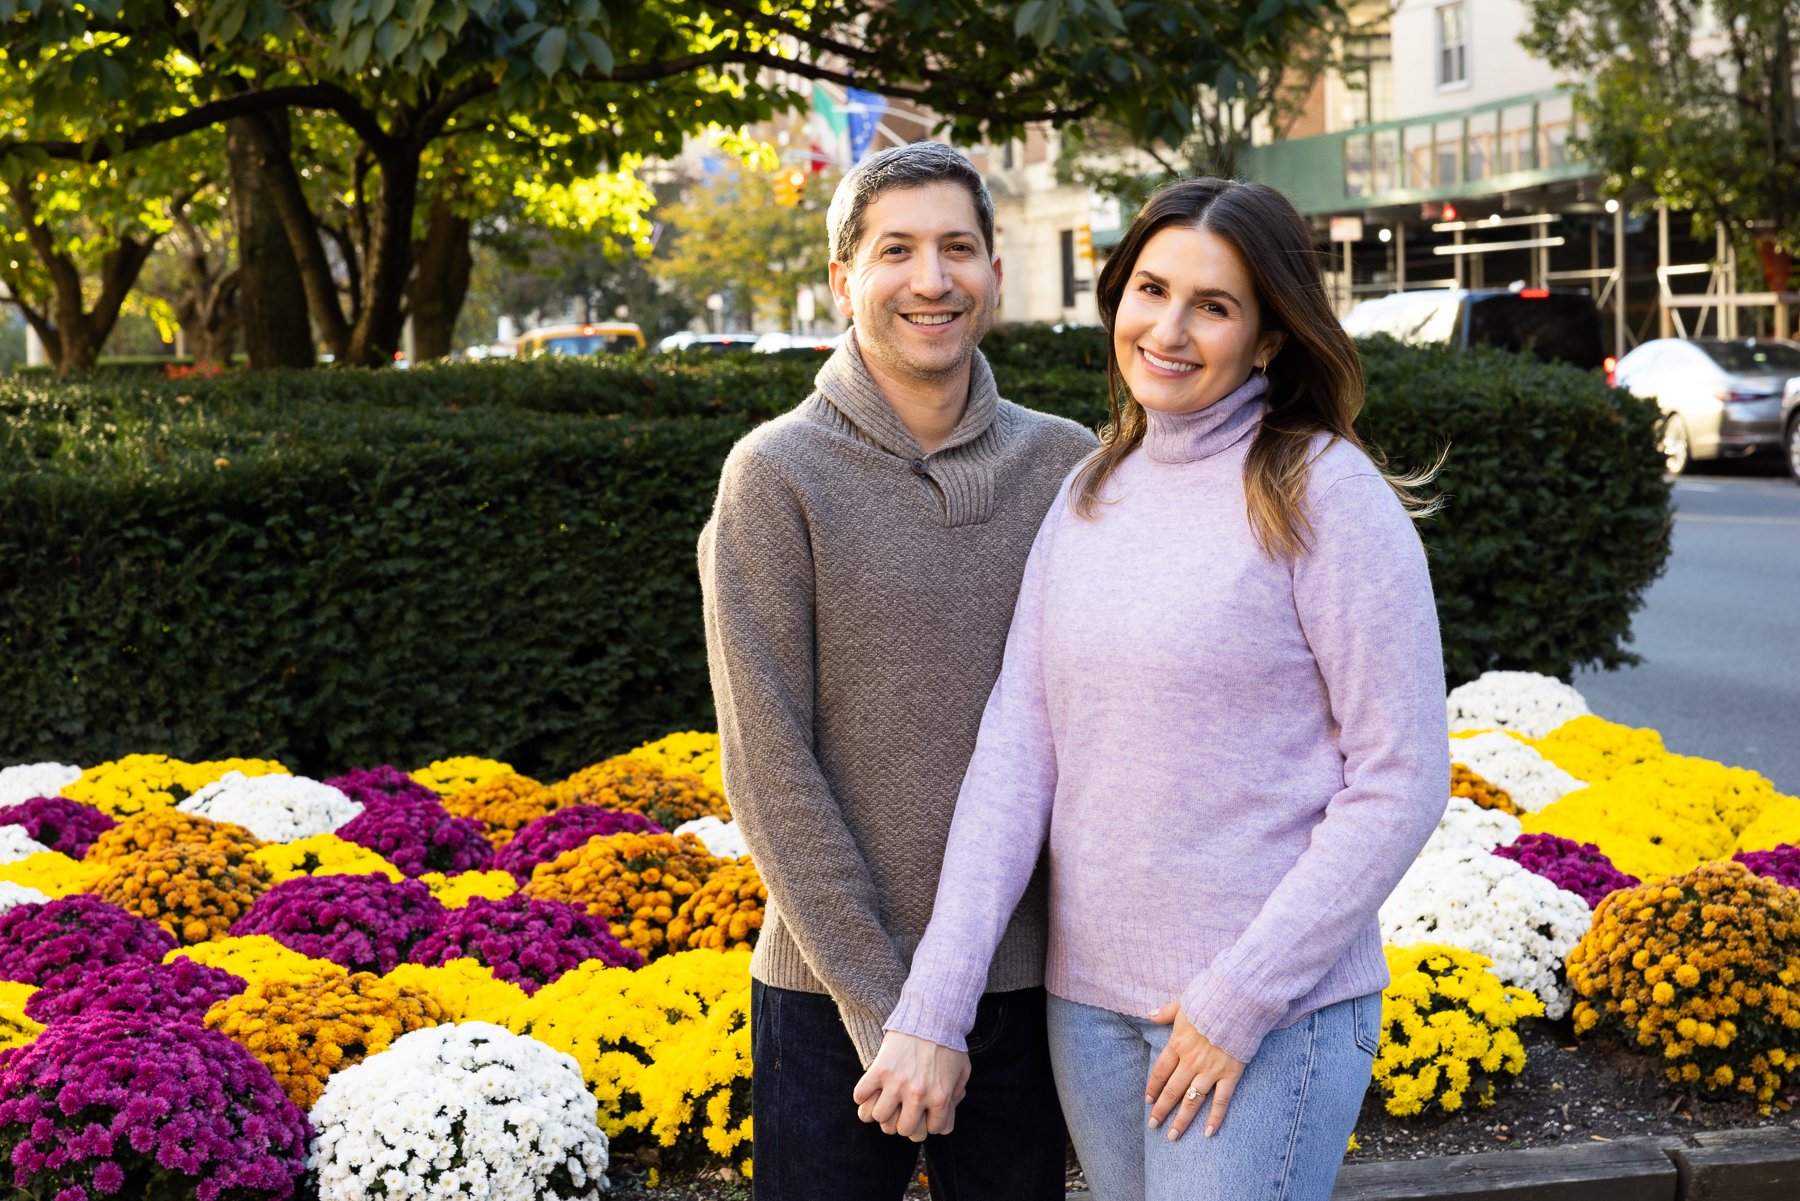 Central Park NYC Fall Foliage Engagement Session_1183.jpg